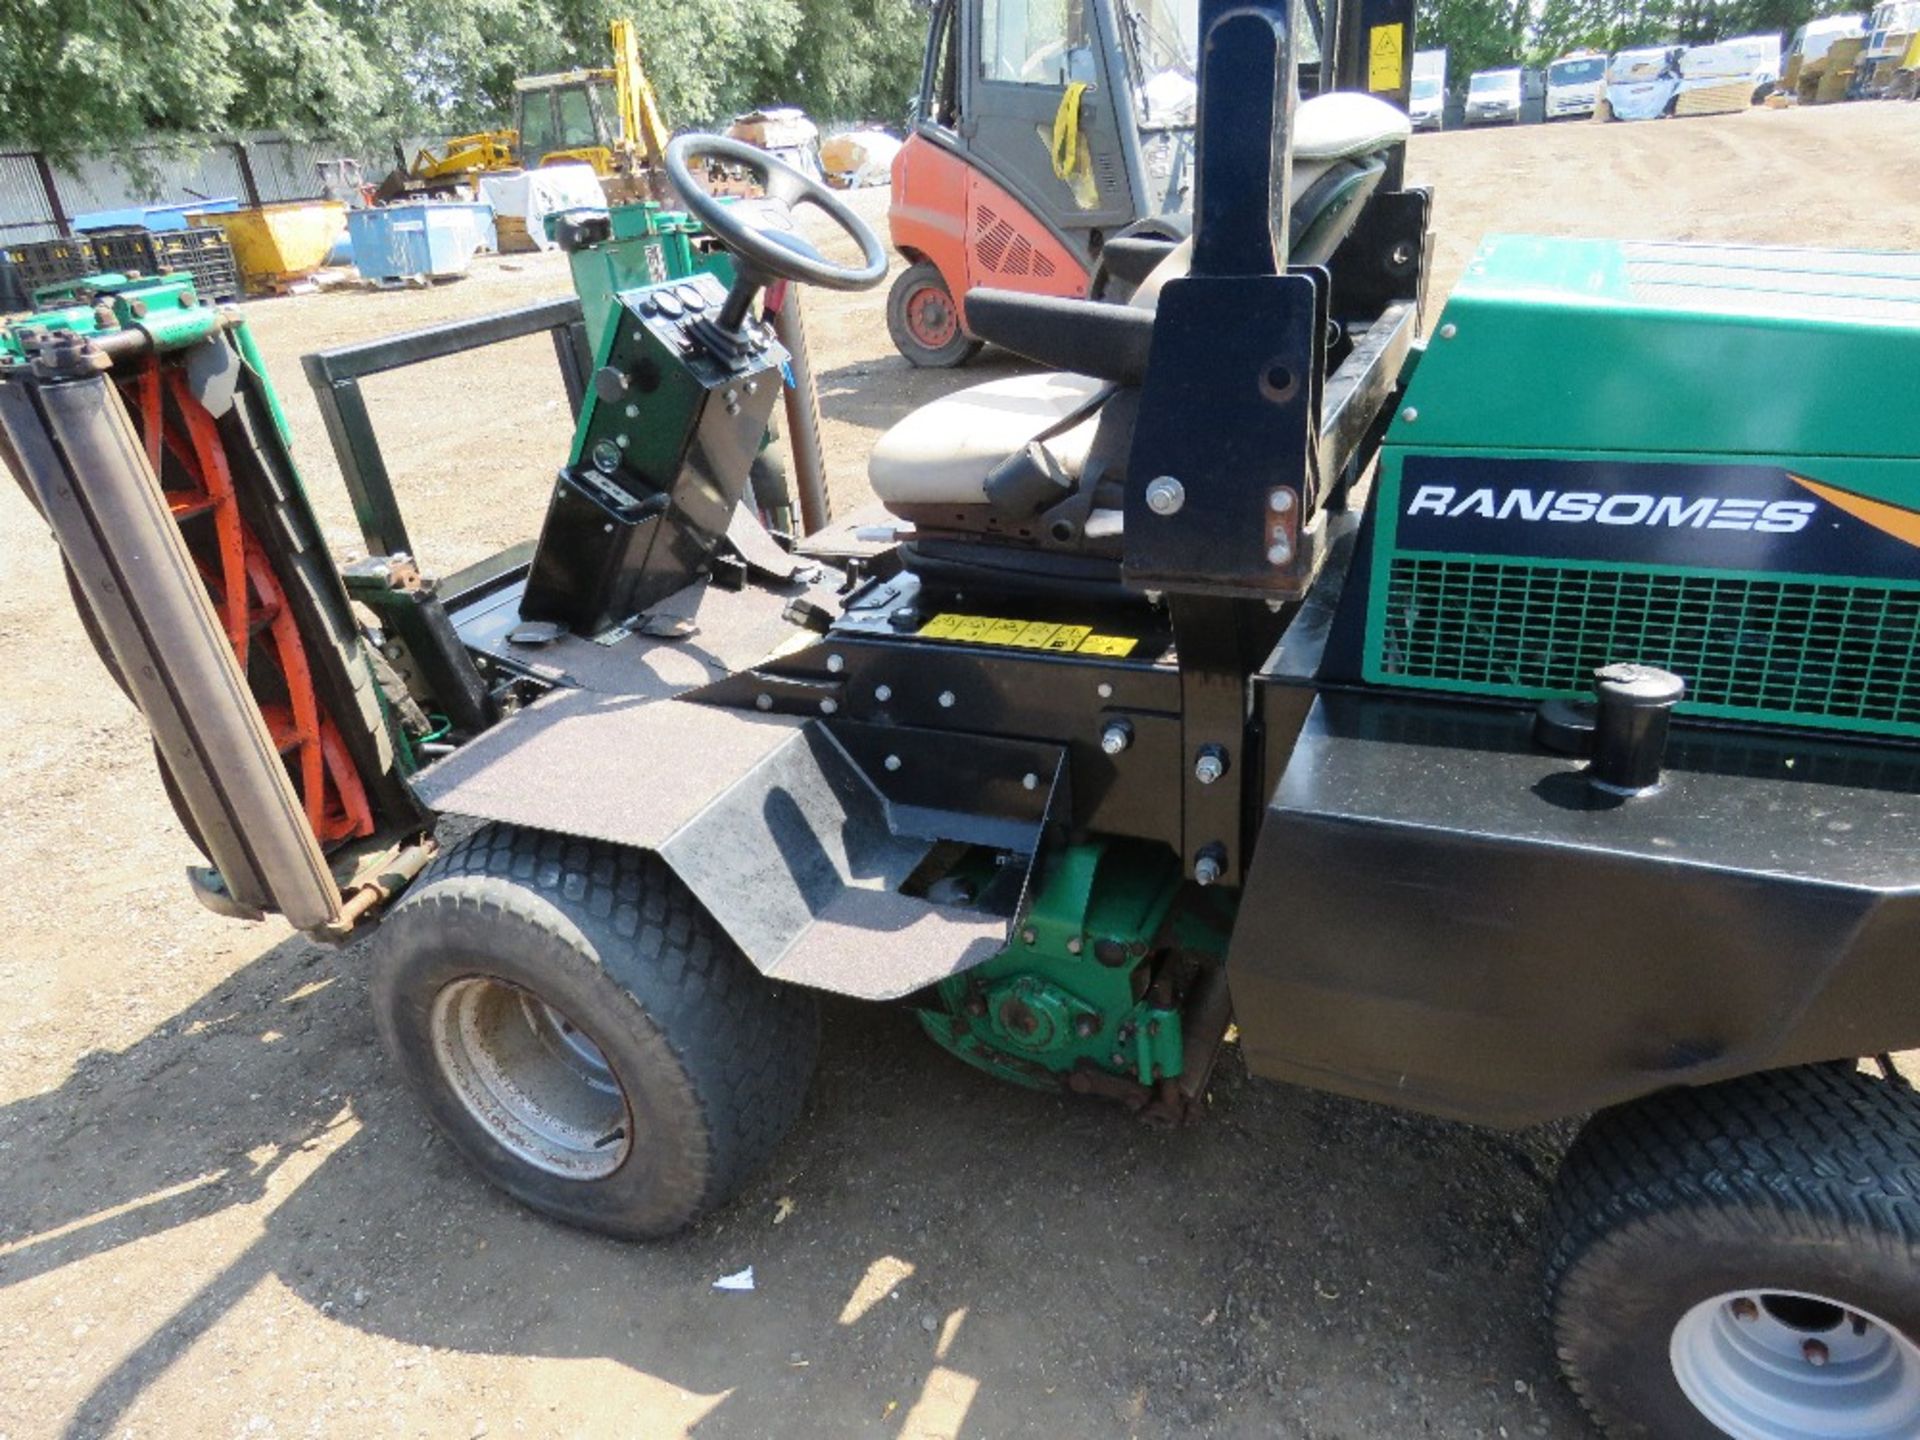 RANSOMES PARKWAY 2250+ TRIPLE RIDE ON MOWER, 4WD, MAGNA 250 HEADS FITTED. 3935 REC HOURS. DIRECT FRO - Image 7 of 12